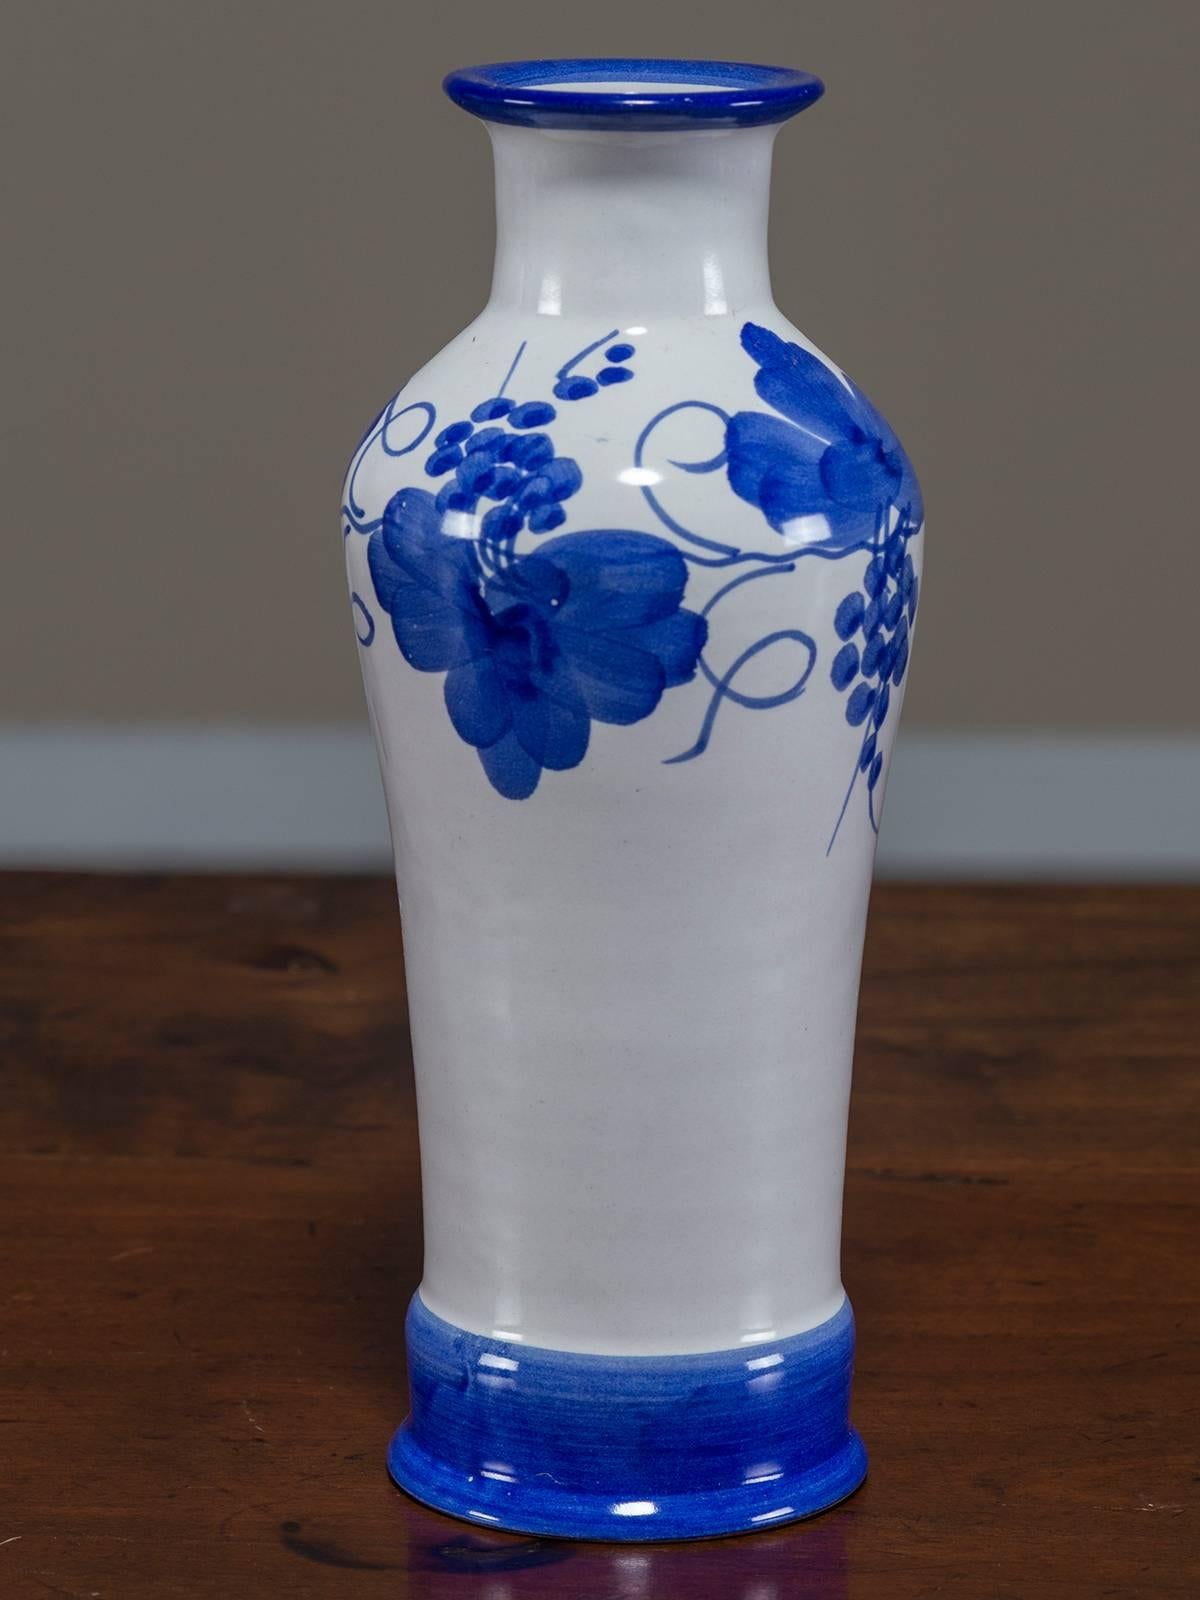 Contemporary Set of Three Blue and White Hand-Painted Italian Vases by Solimene, Vietri